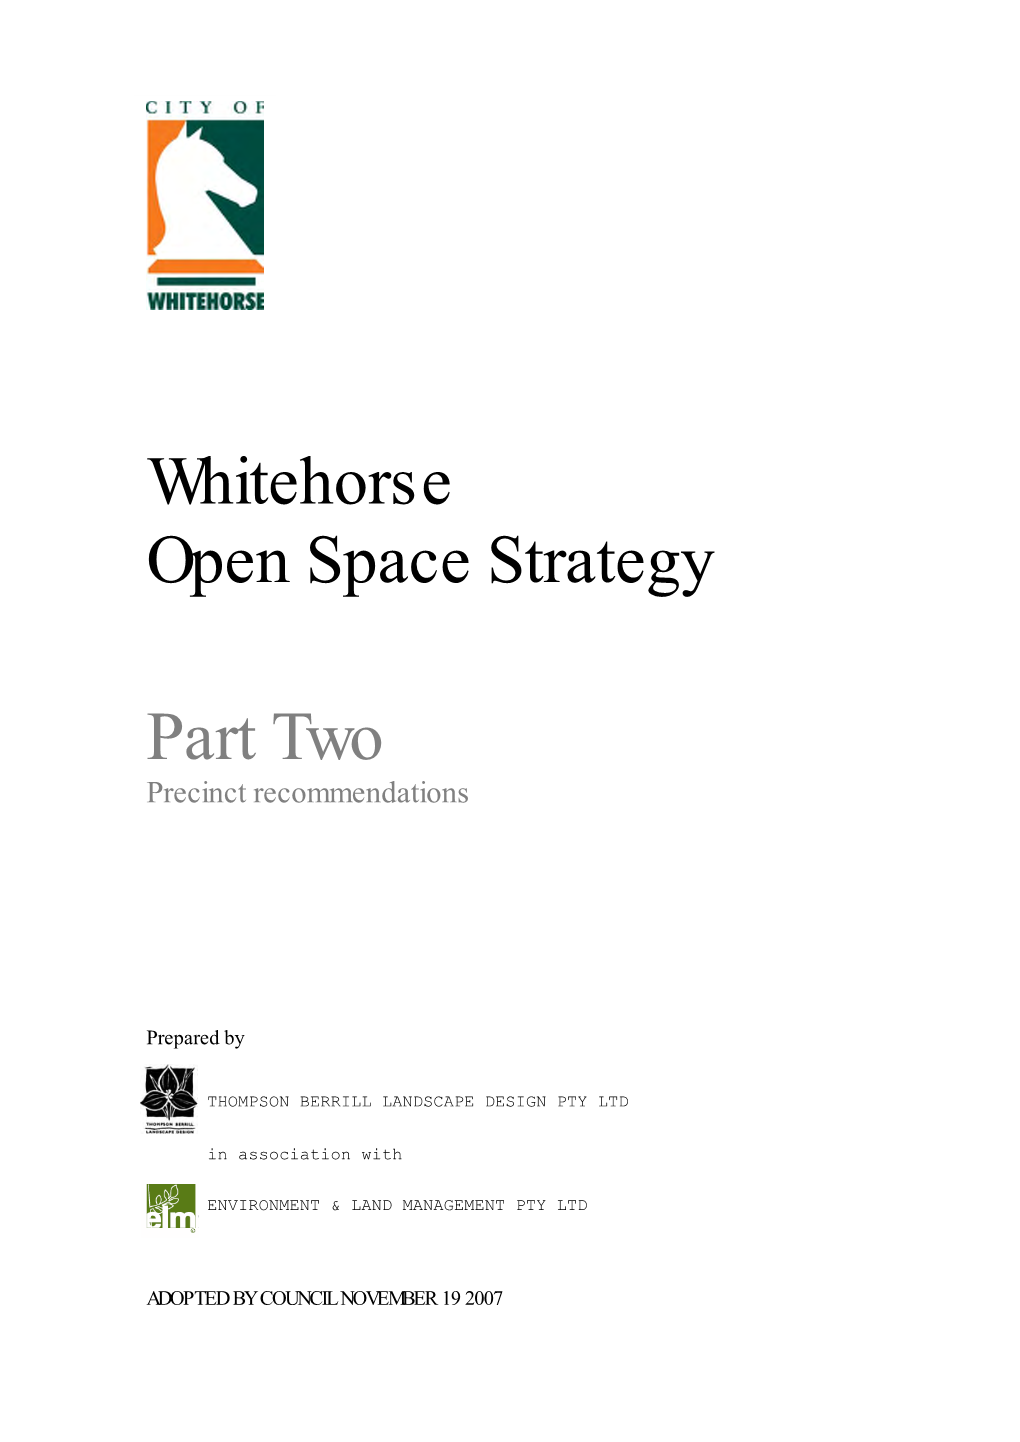 Whitehorse Open Space Strategy